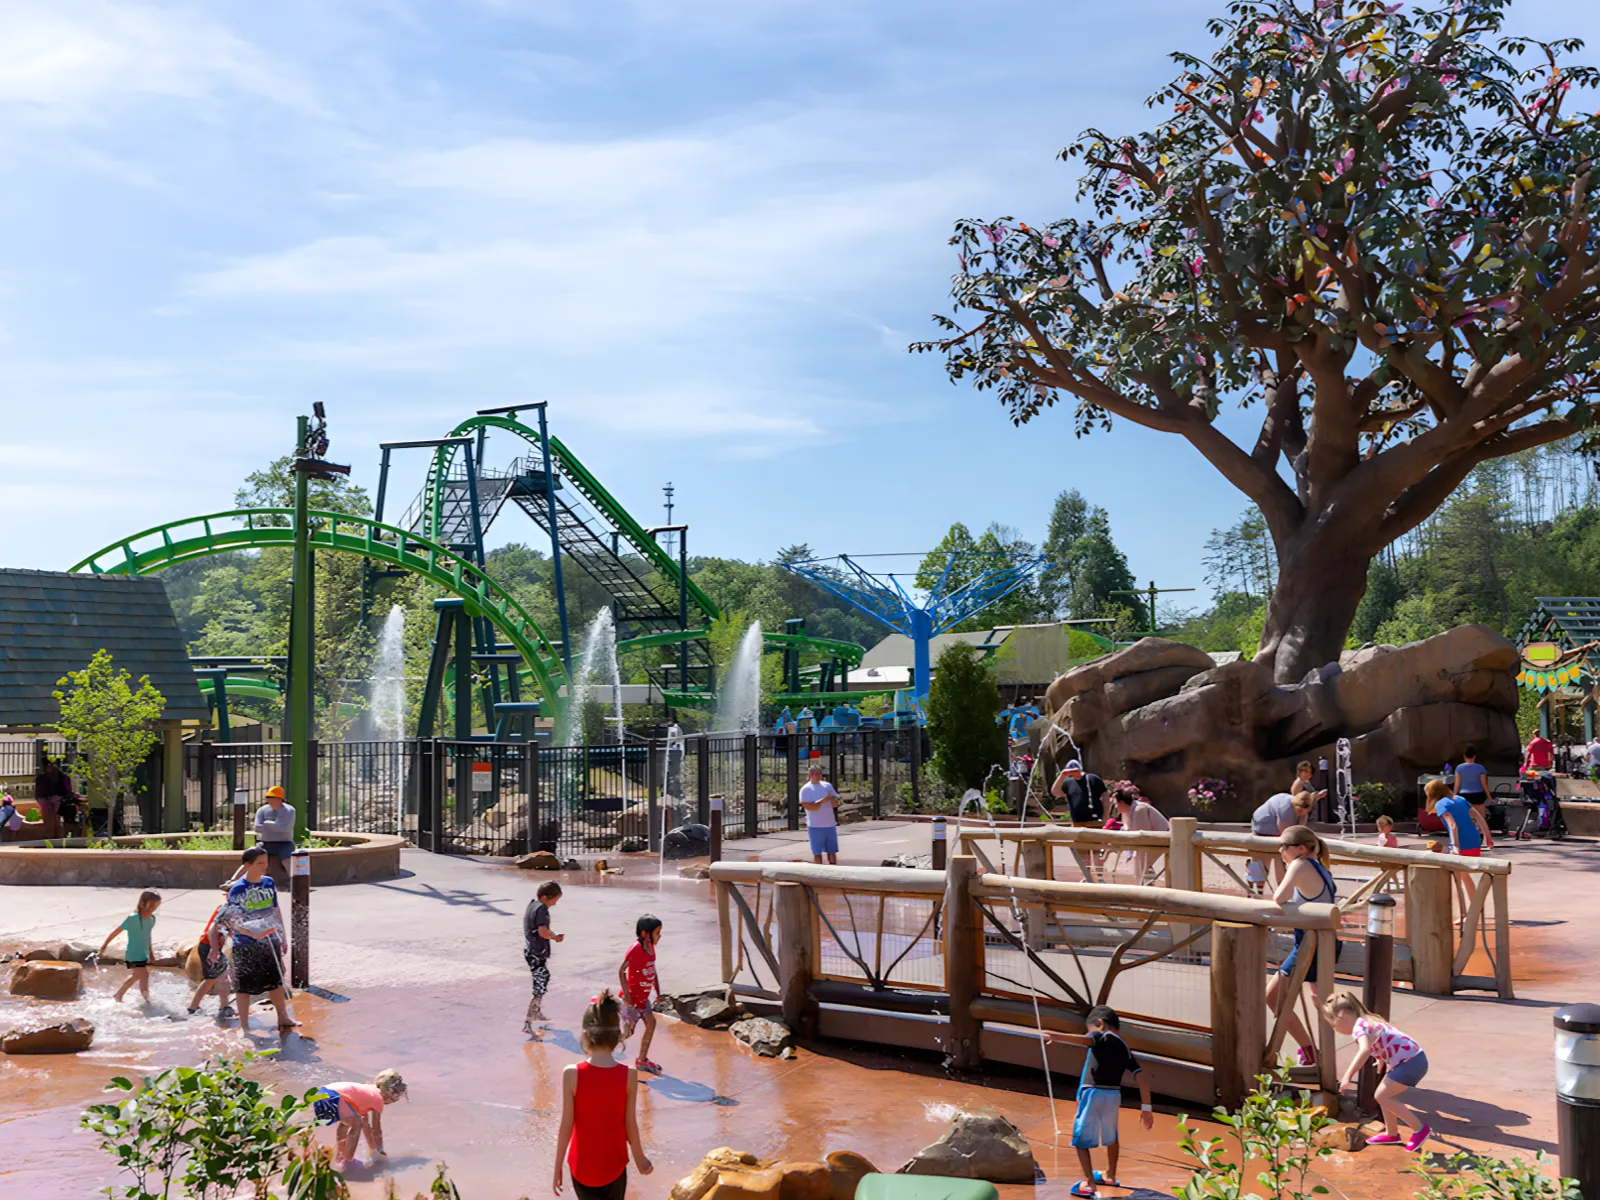 Dollywood tree with children playing at the splash park and roller coaster in the background